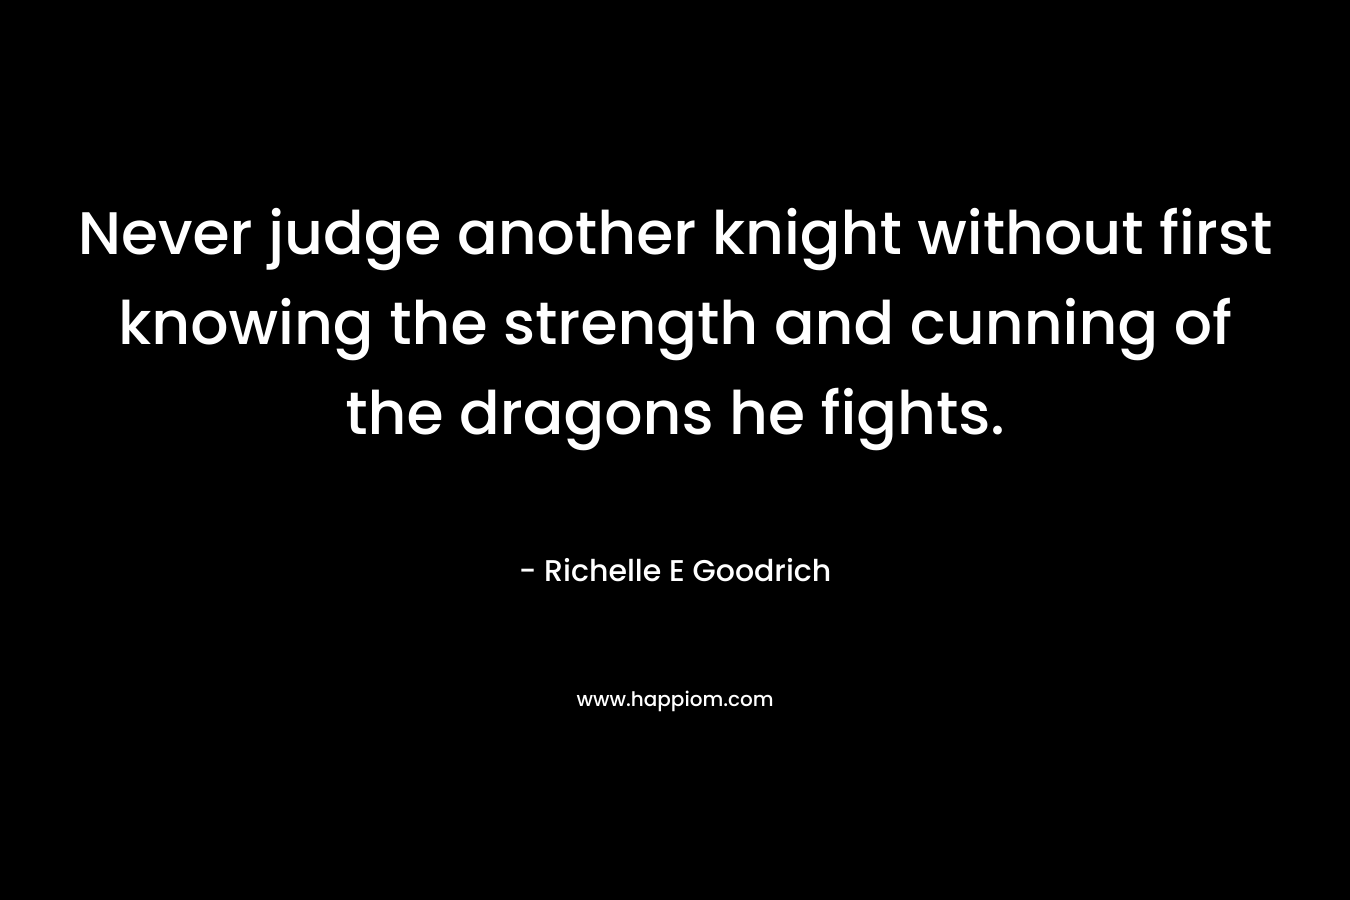 Never judge another knight without first knowing the strength and cunning of the dragons he fights. – Richelle E Goodrich